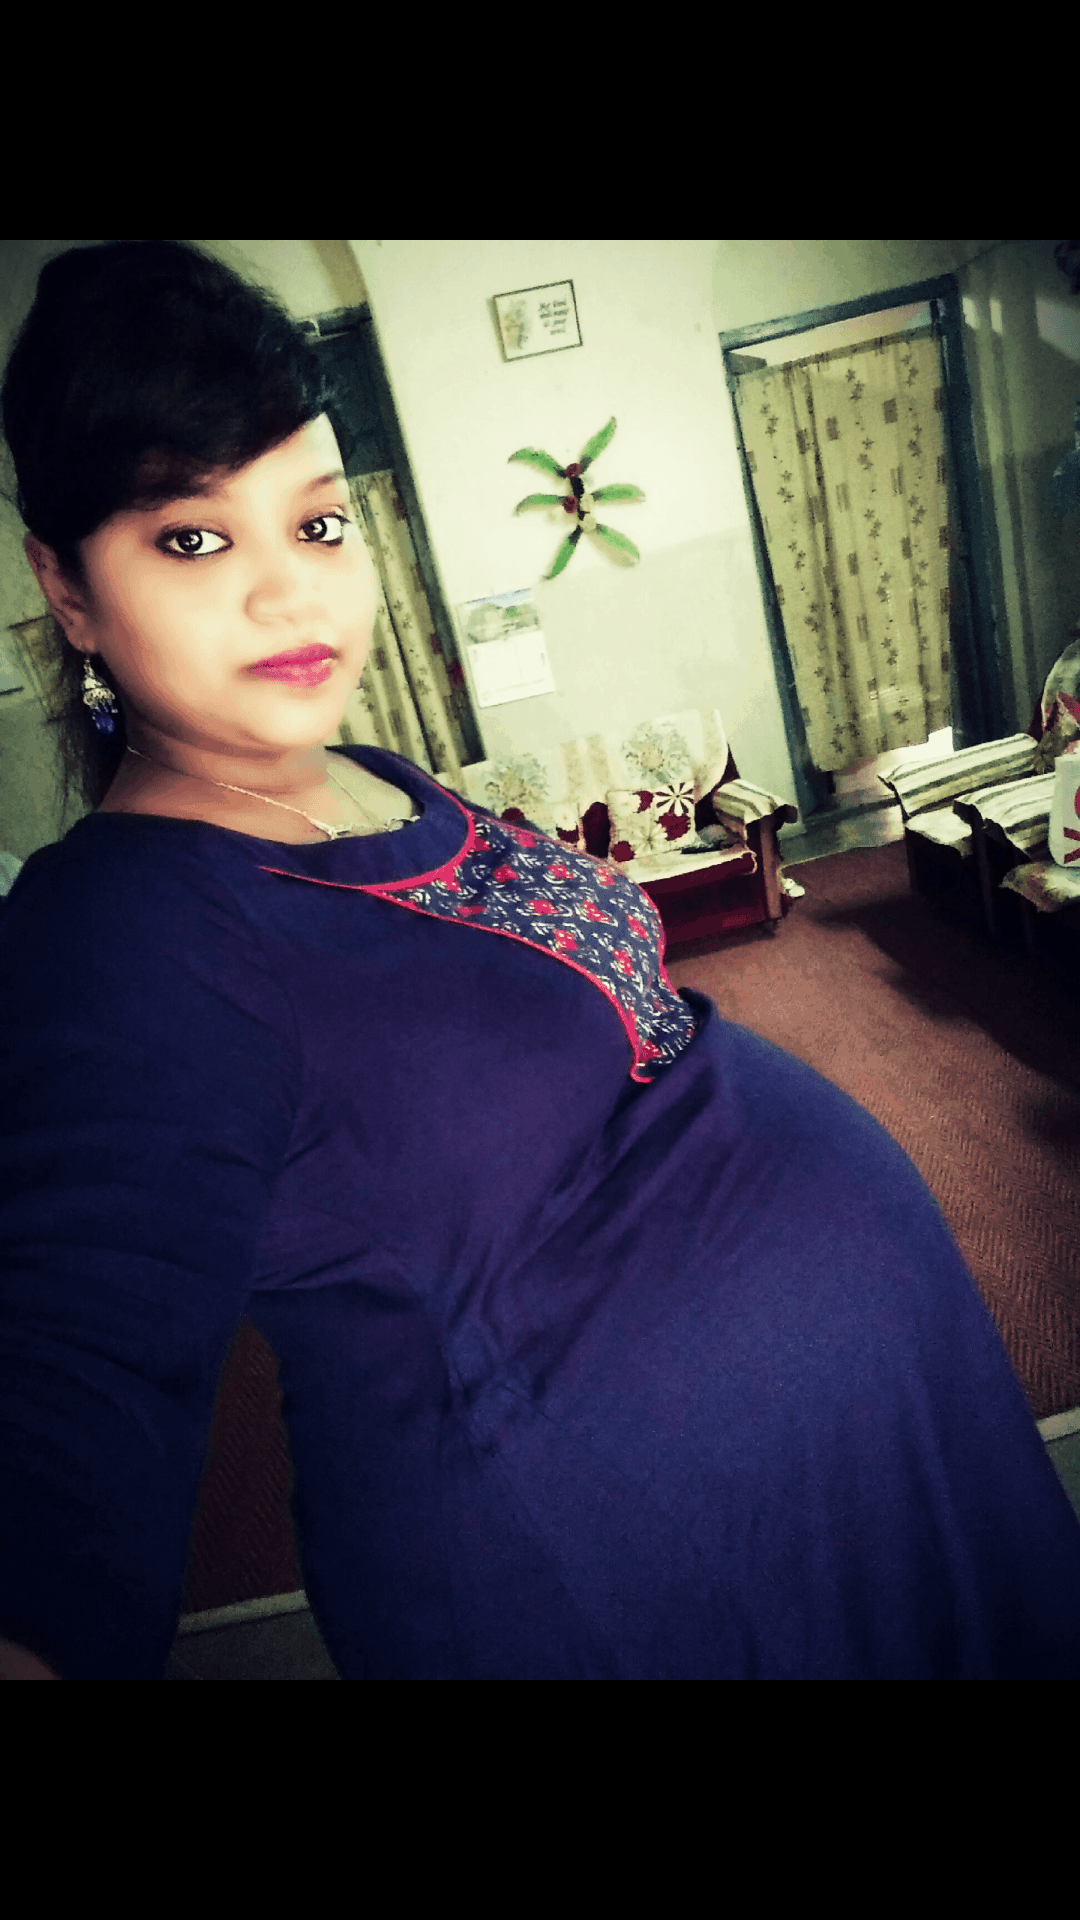 30 weeks pregnant with twins